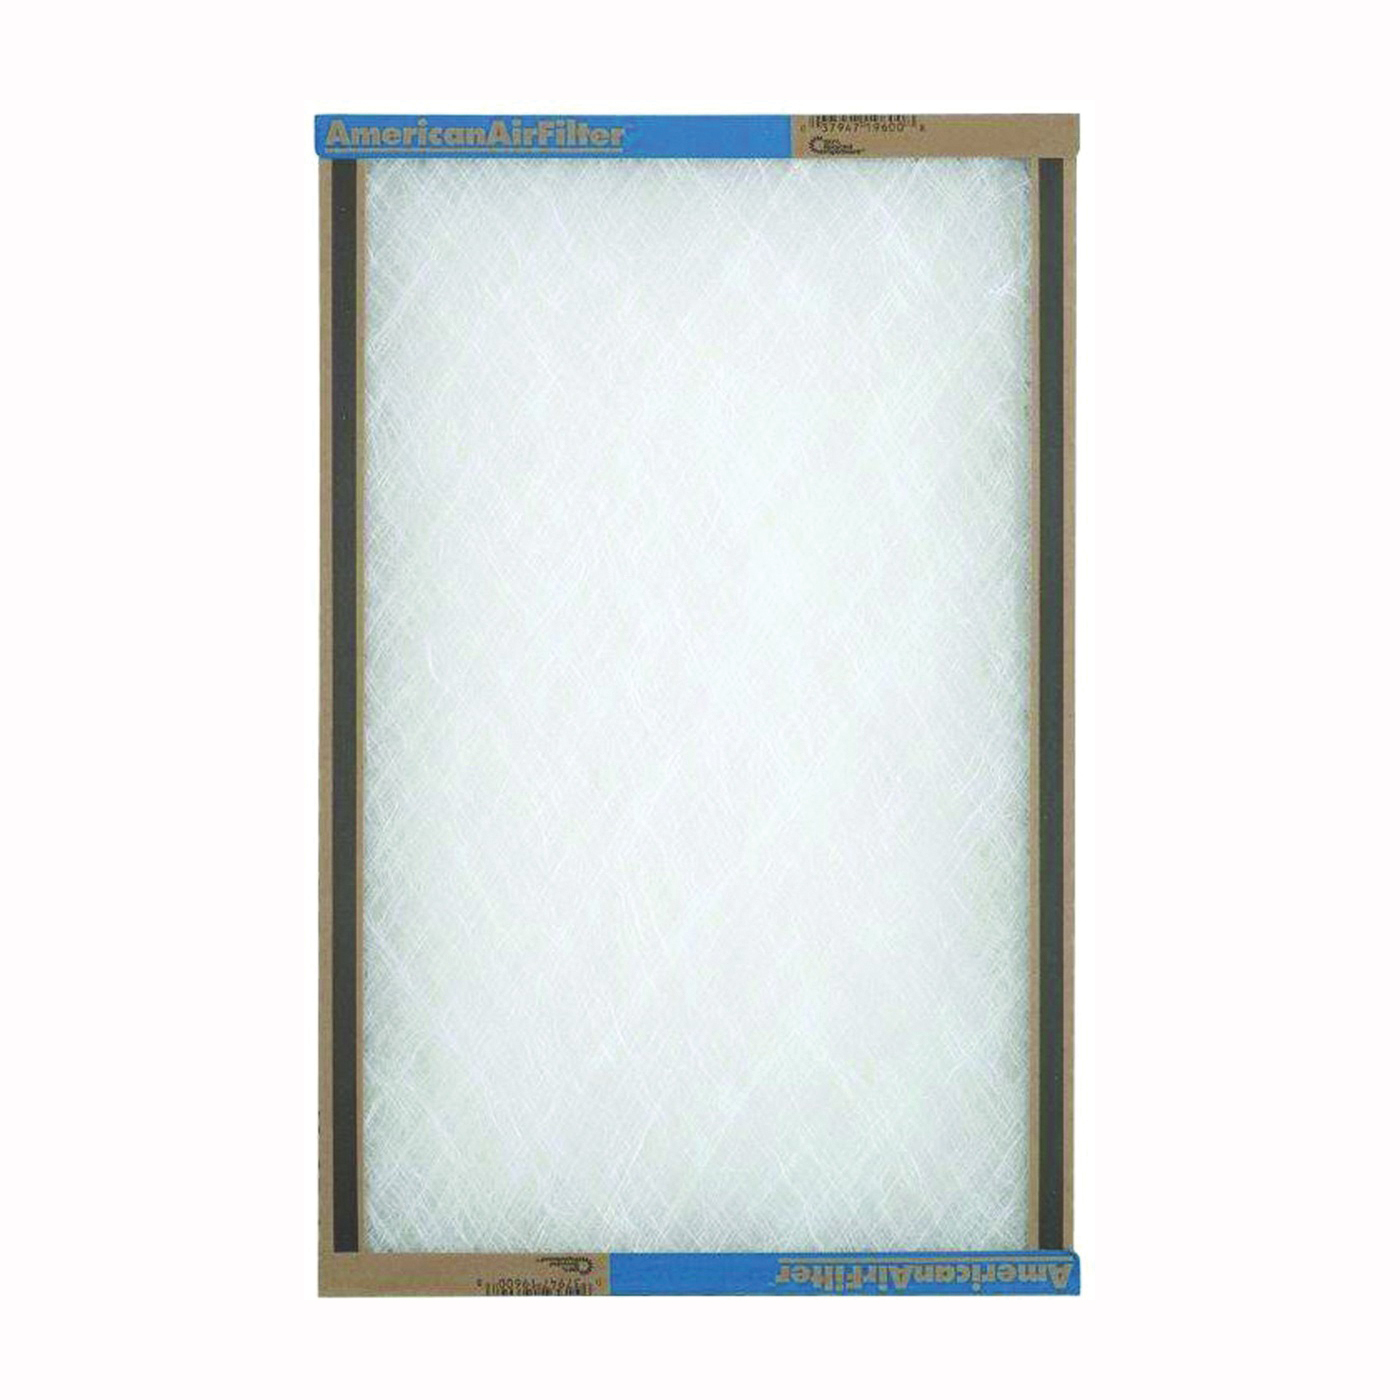 220-500-051 Panel Filter, 20 in L, 16 in W, Chipboard Frame